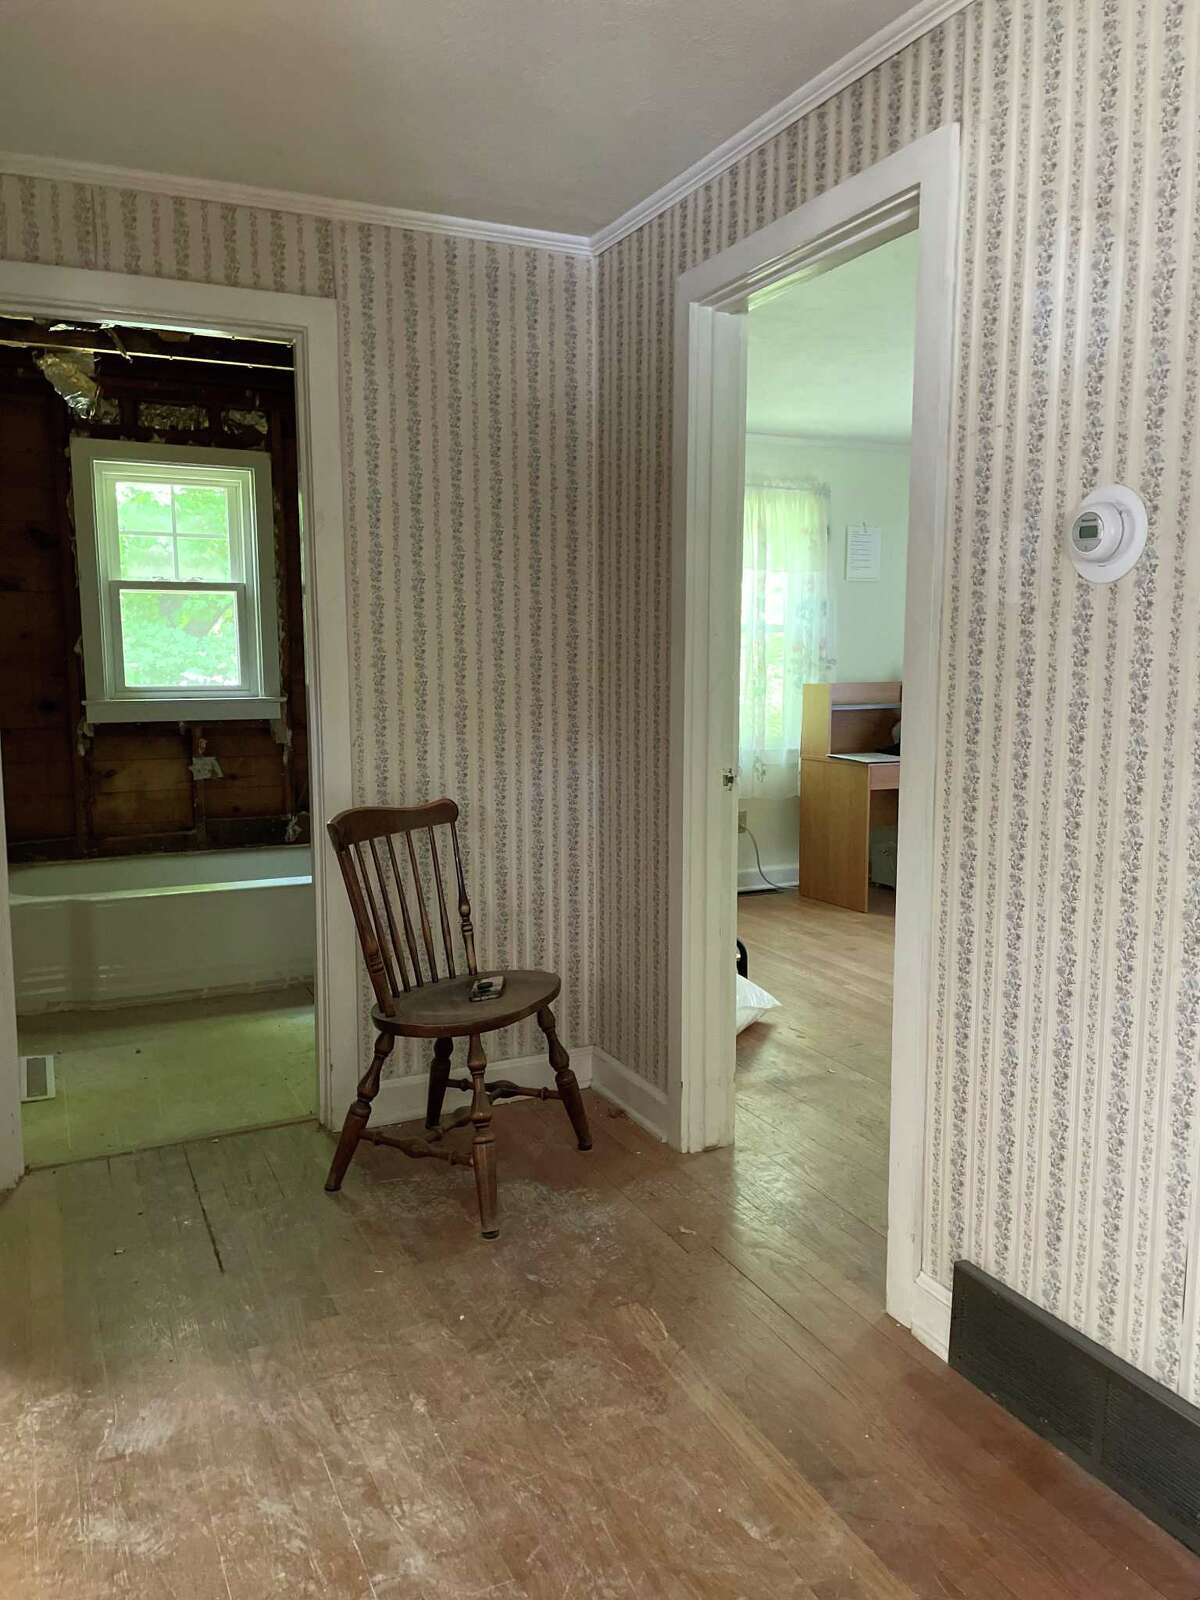 The interior of the SARAH Project house in North Branford.